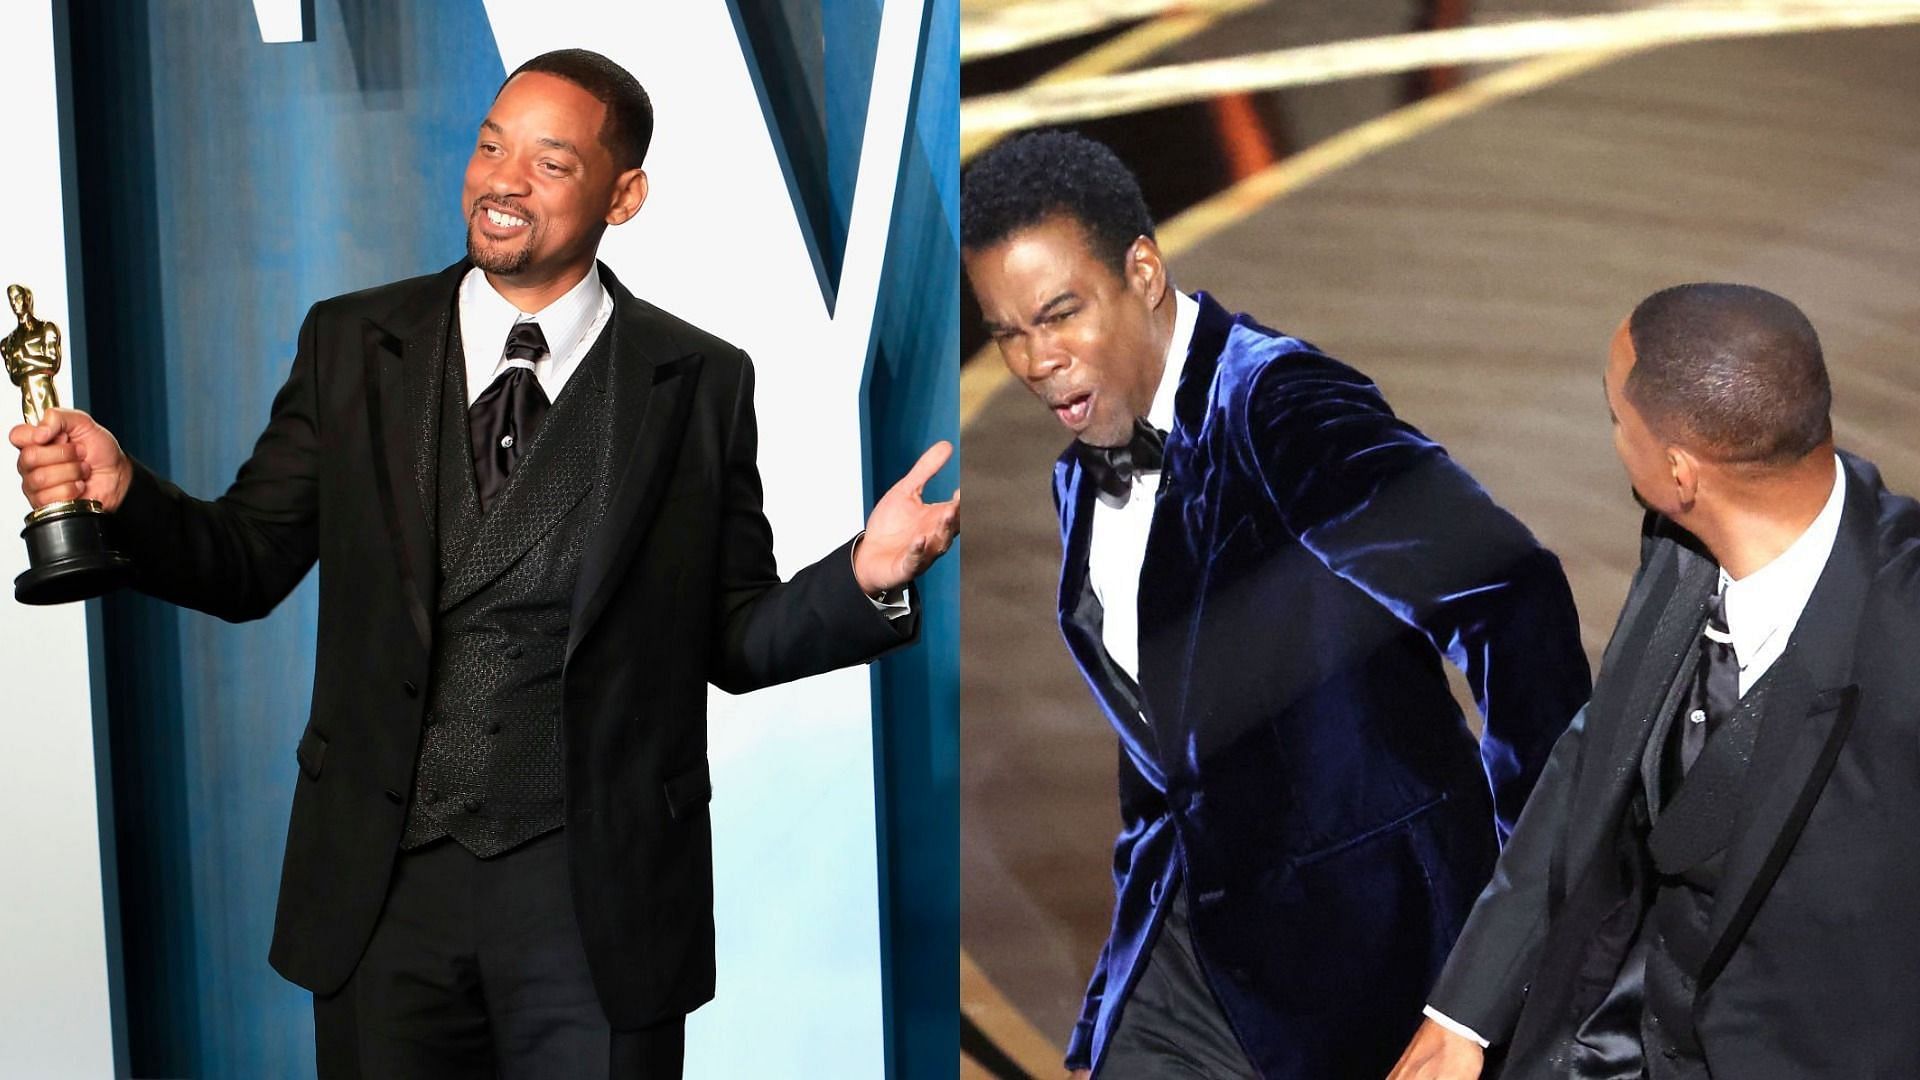 Will Smith has been banned from the Academy for ten years for his slapping Chris Rock at the 2022 Oscars (Image via Getty Images)